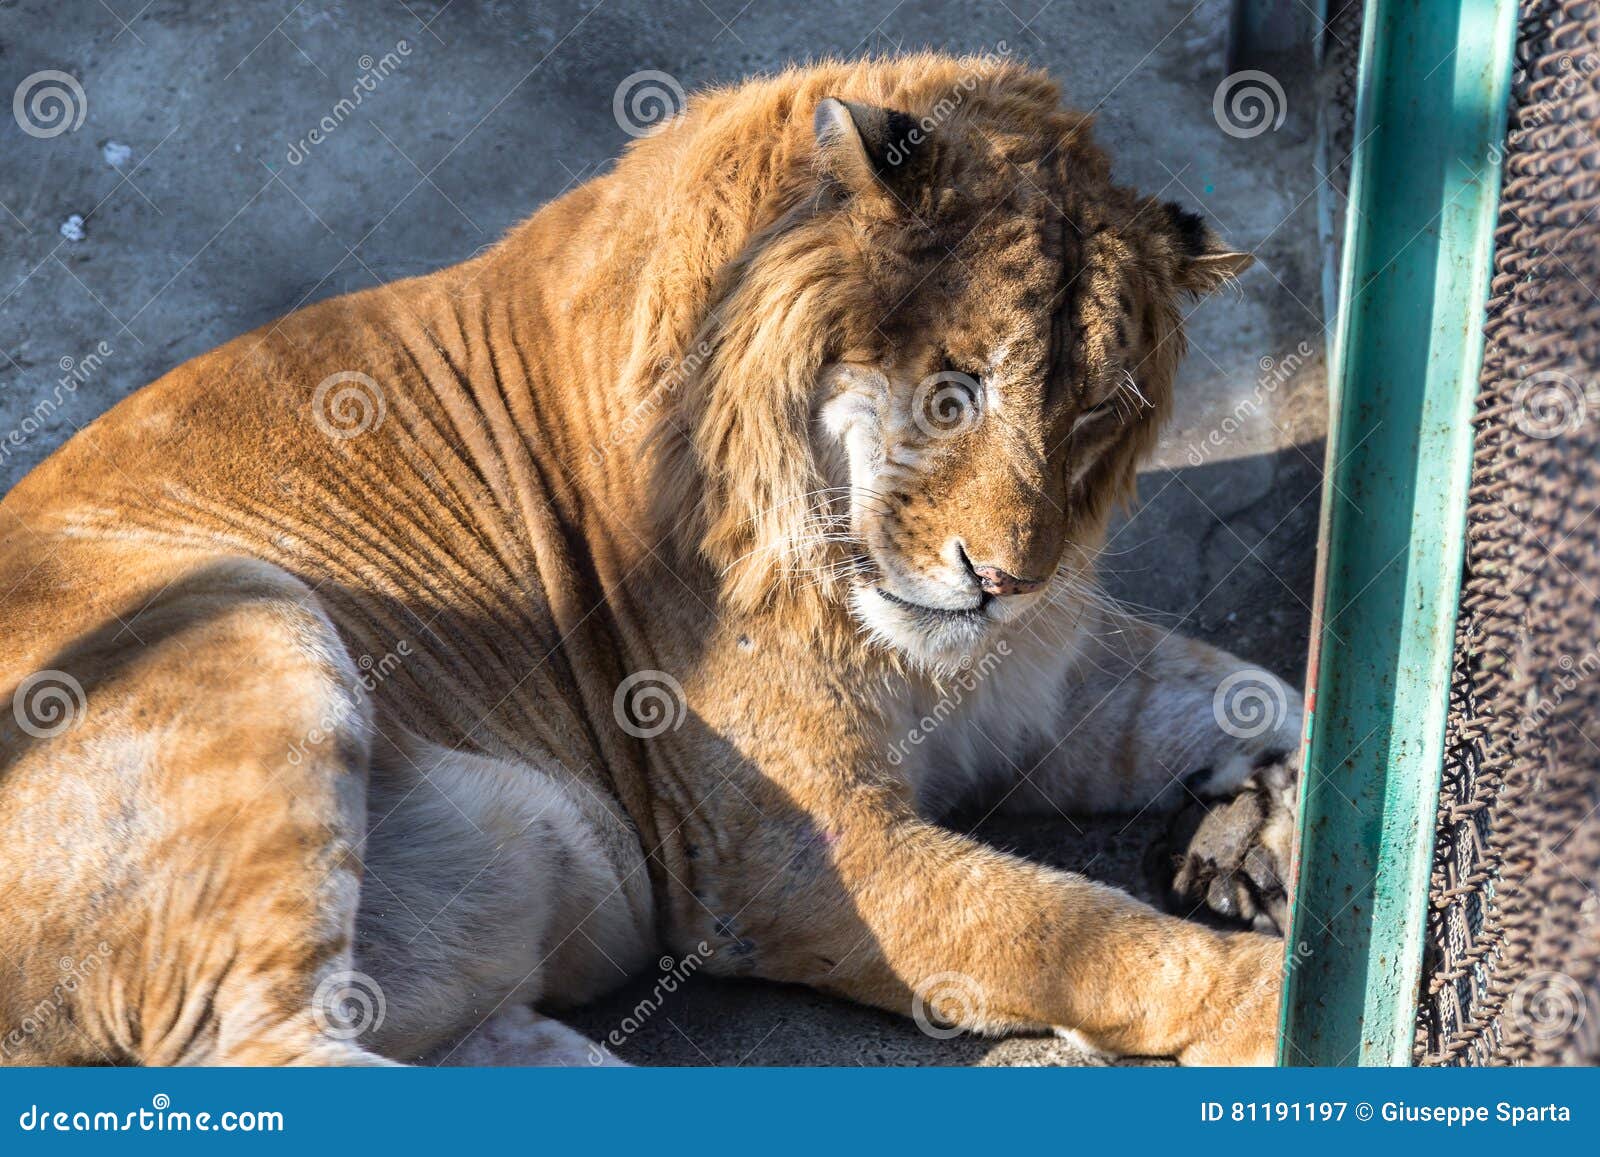 A Liger in the Siberian Tiger Park, Harbin, China. Stock Image ...